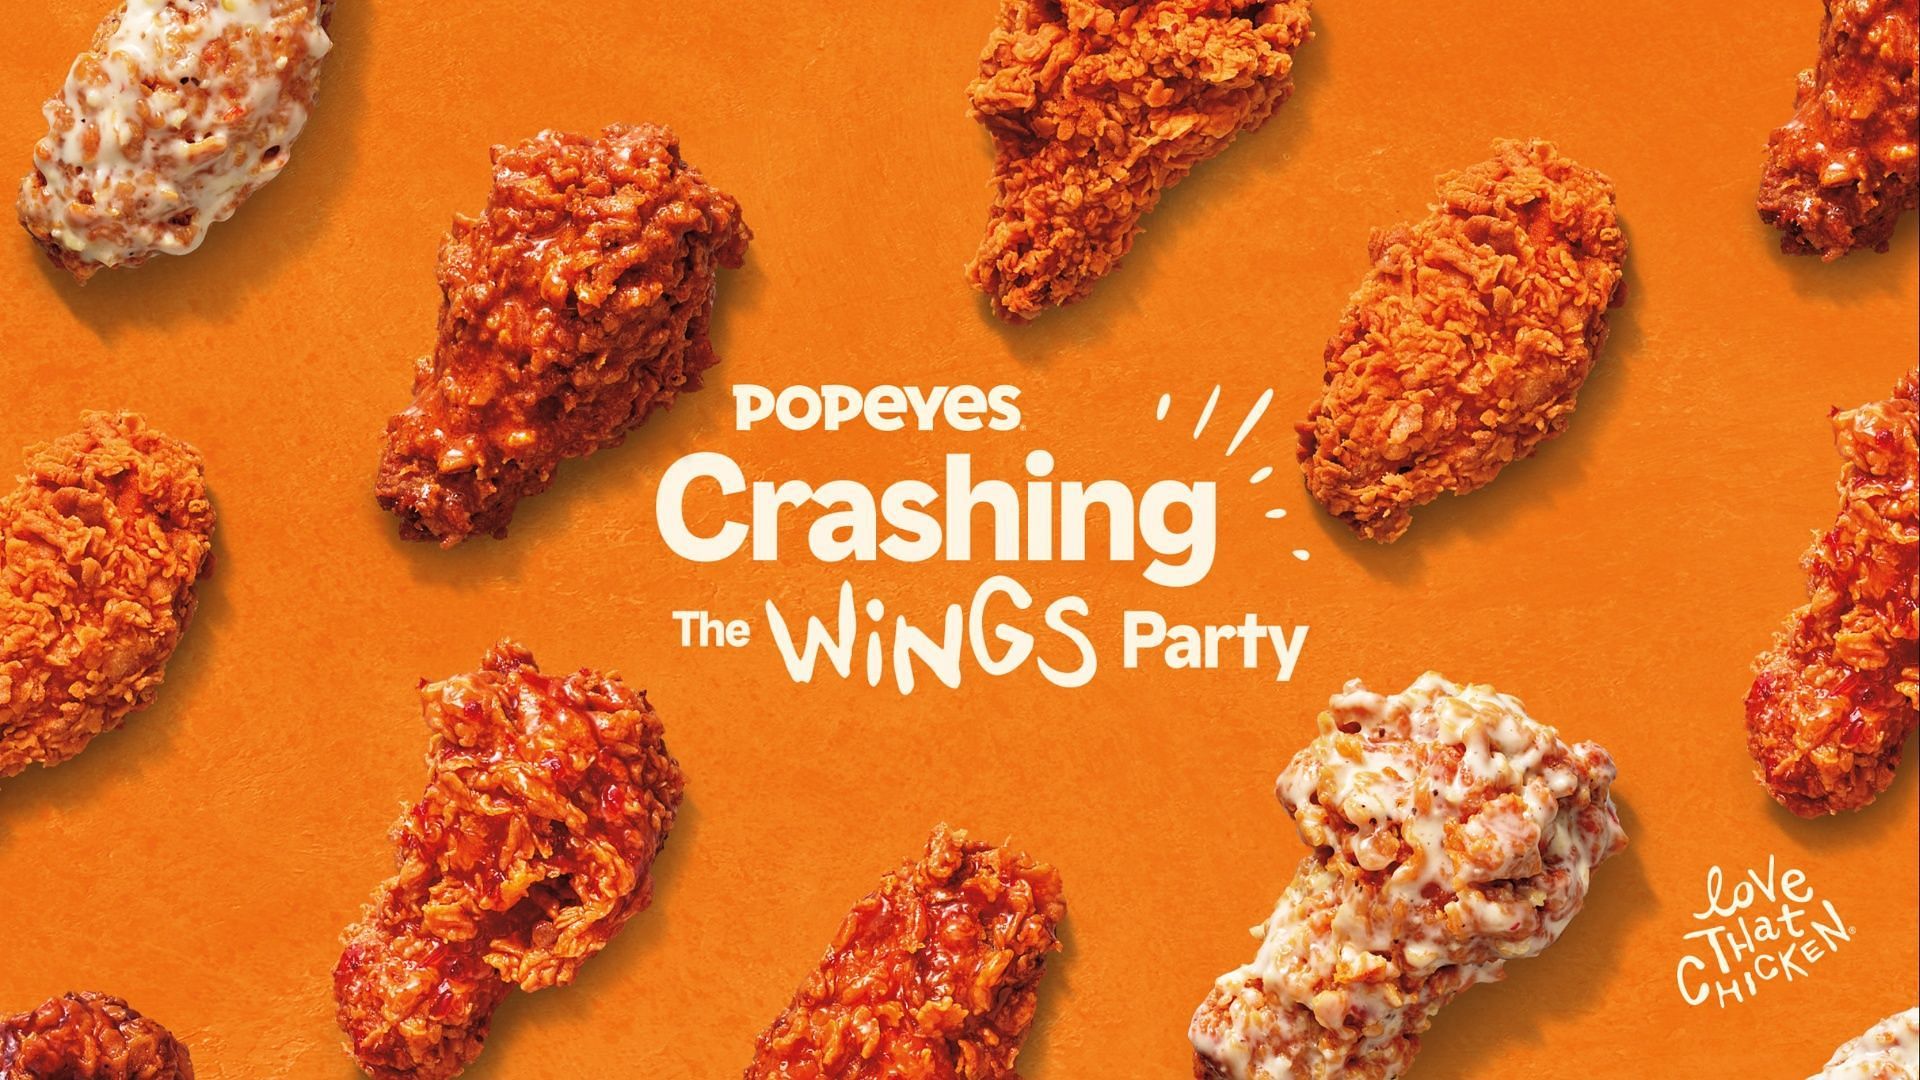 Chicken Wings join the Popyeyes menu as a permanent offering (Image via Popeyes)